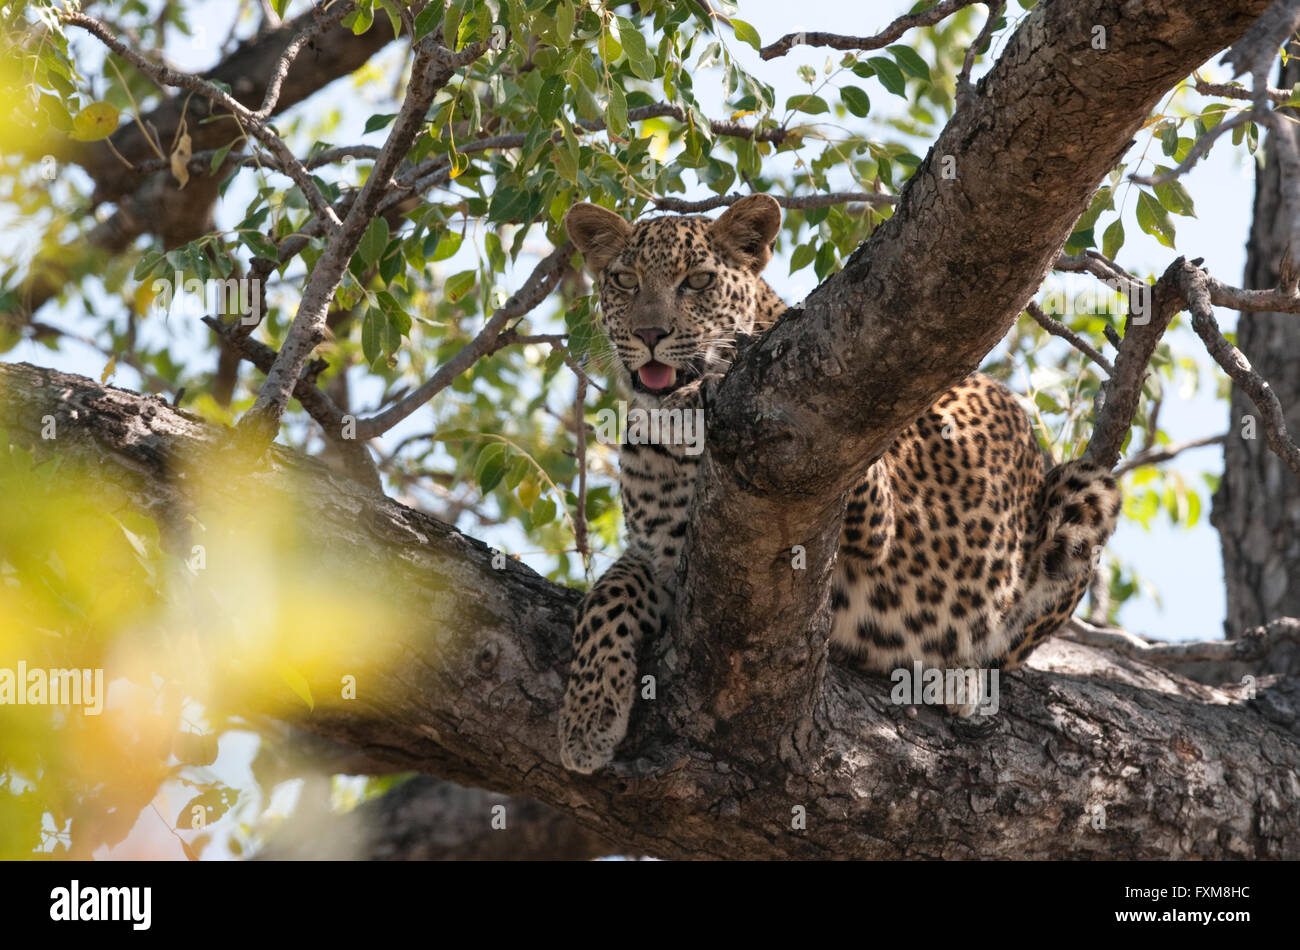 Leopard (Panthera pardus) in a tree in Kruger National Park, South Africa Stock Photo